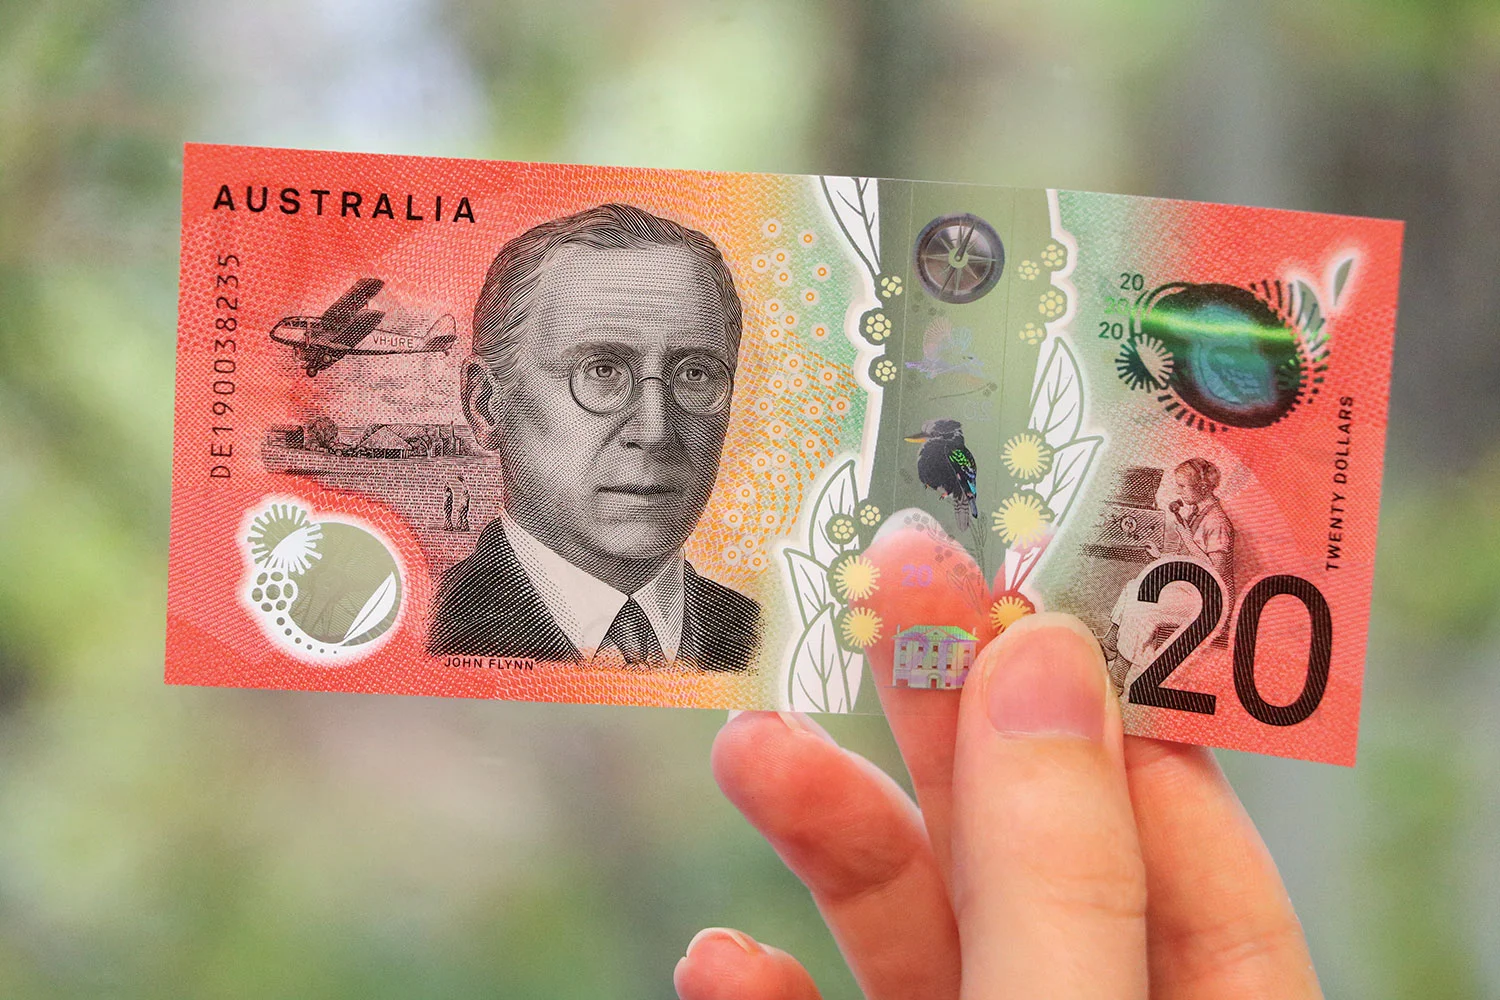 A$20 banknote